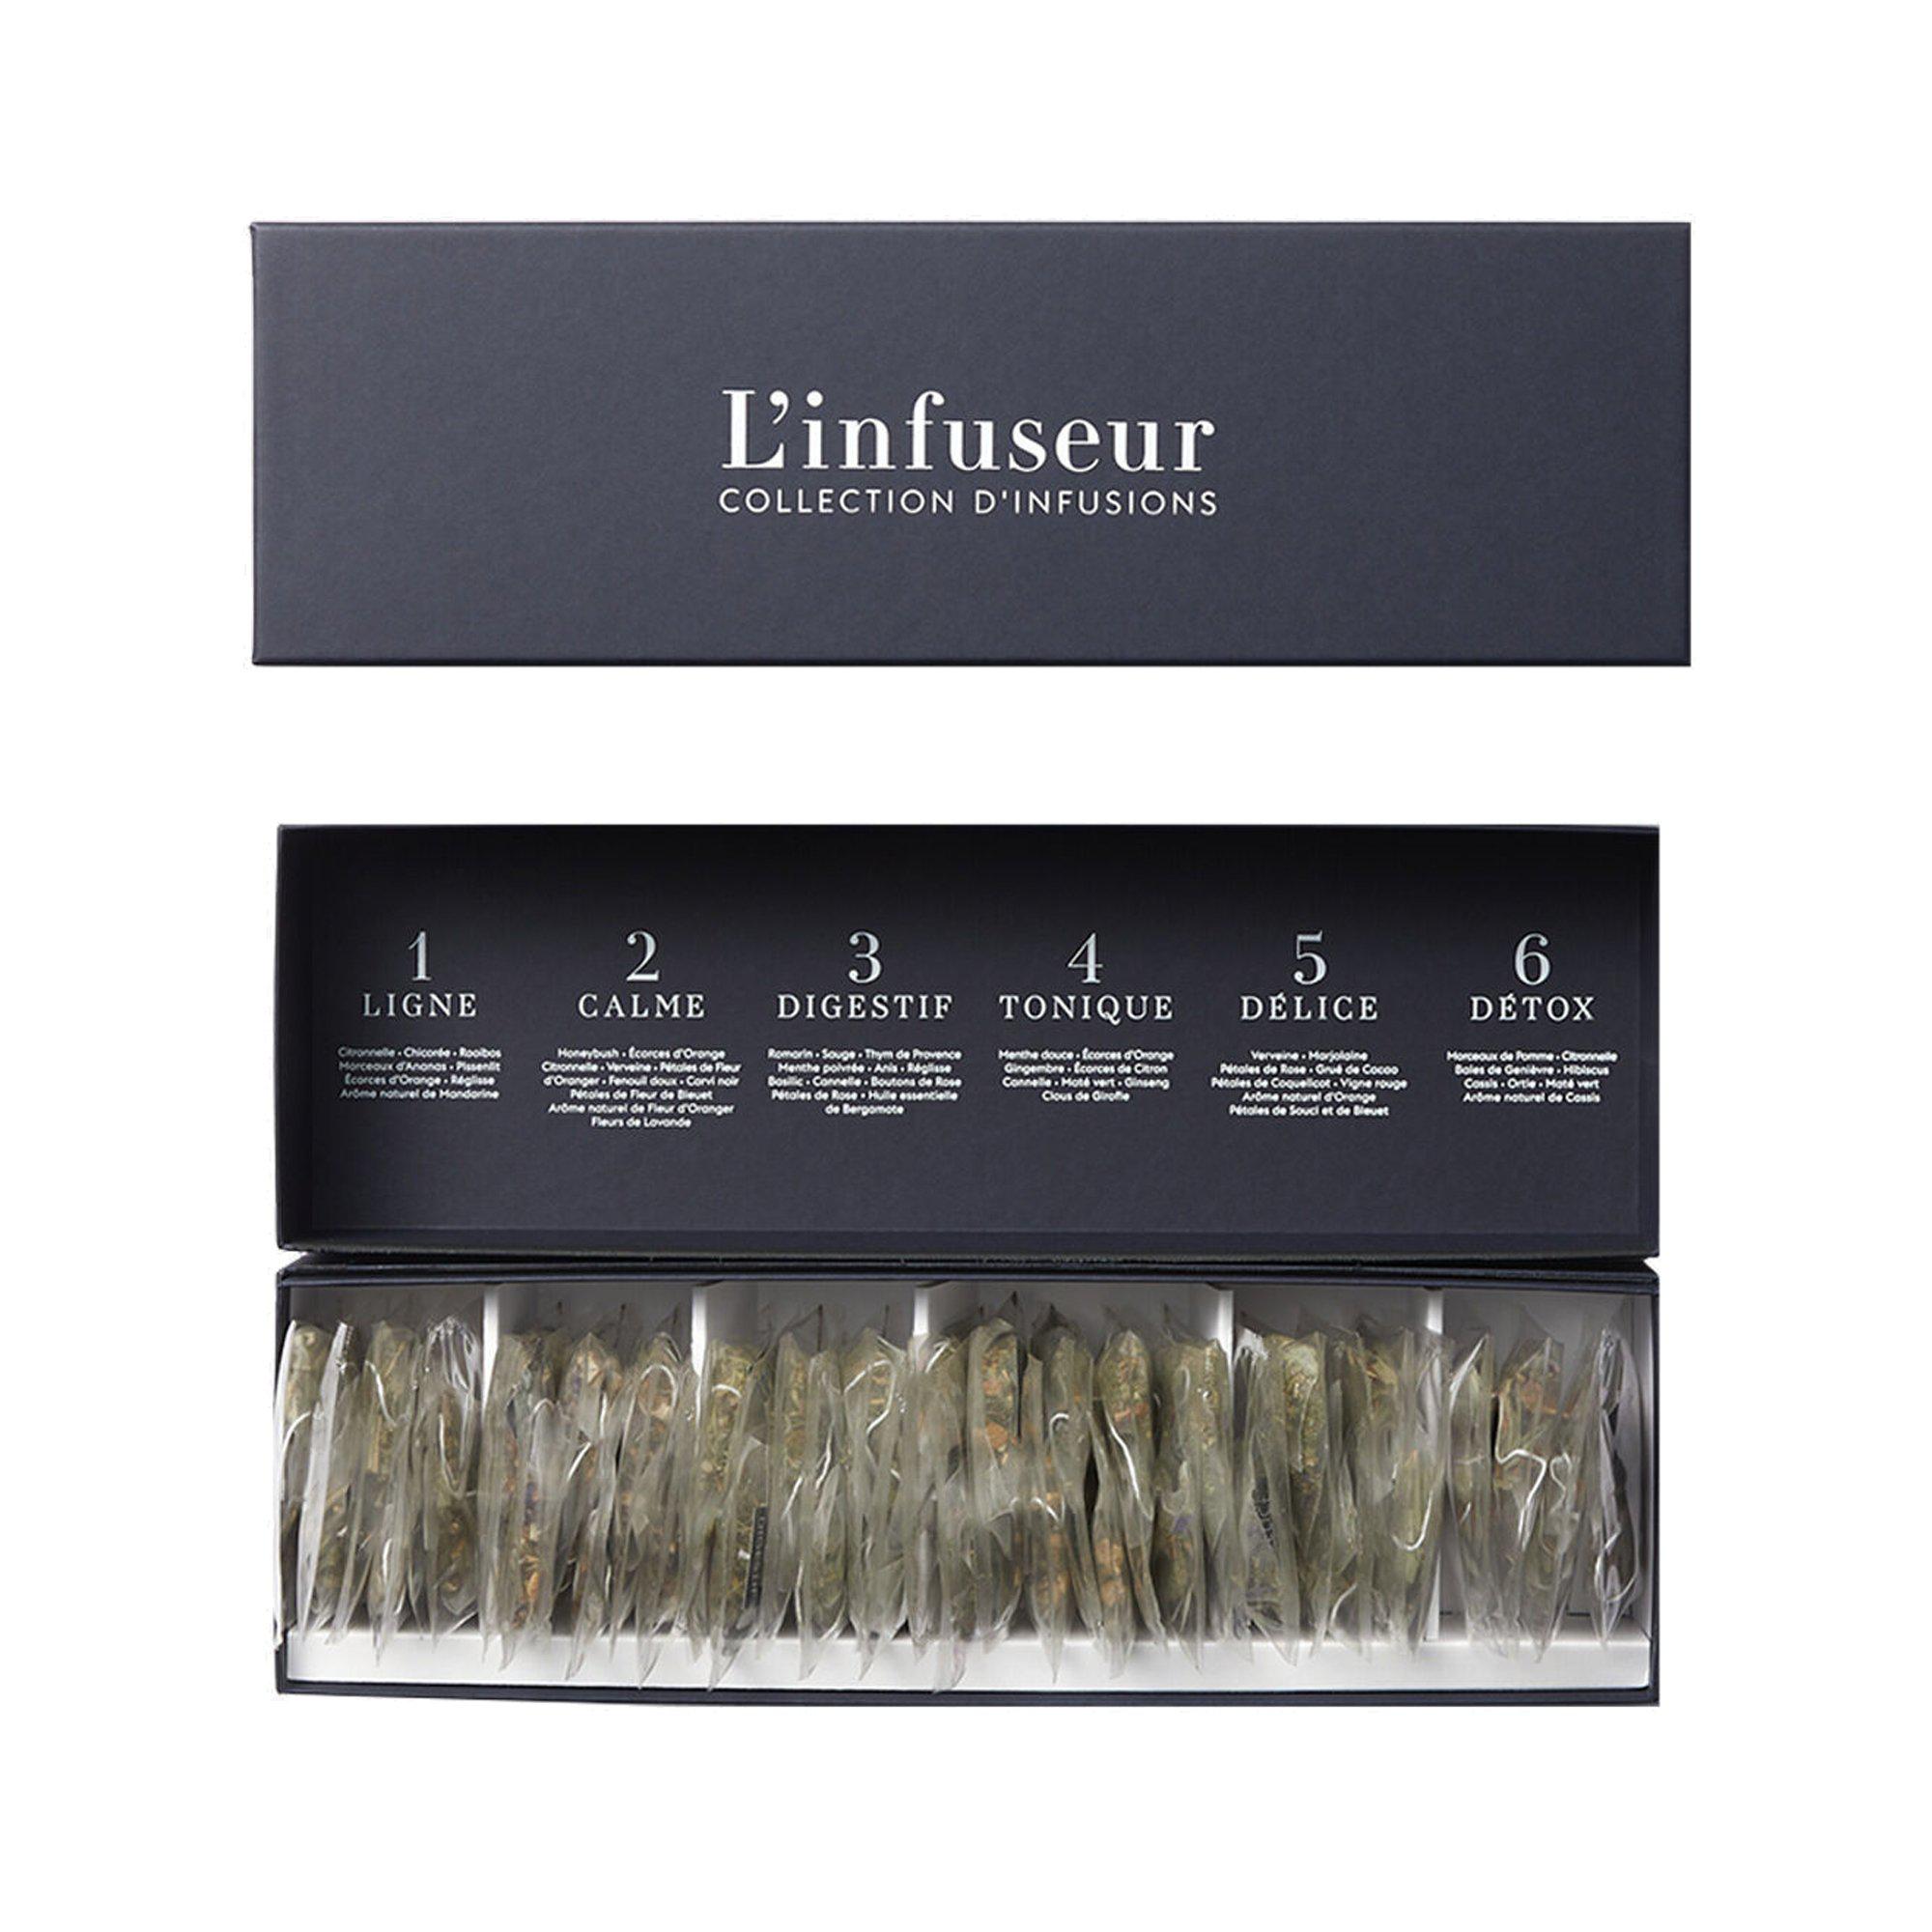 Collection d'infusions - L'Infuseur Collection d'infusions - L'Infuseur - L'infuseur